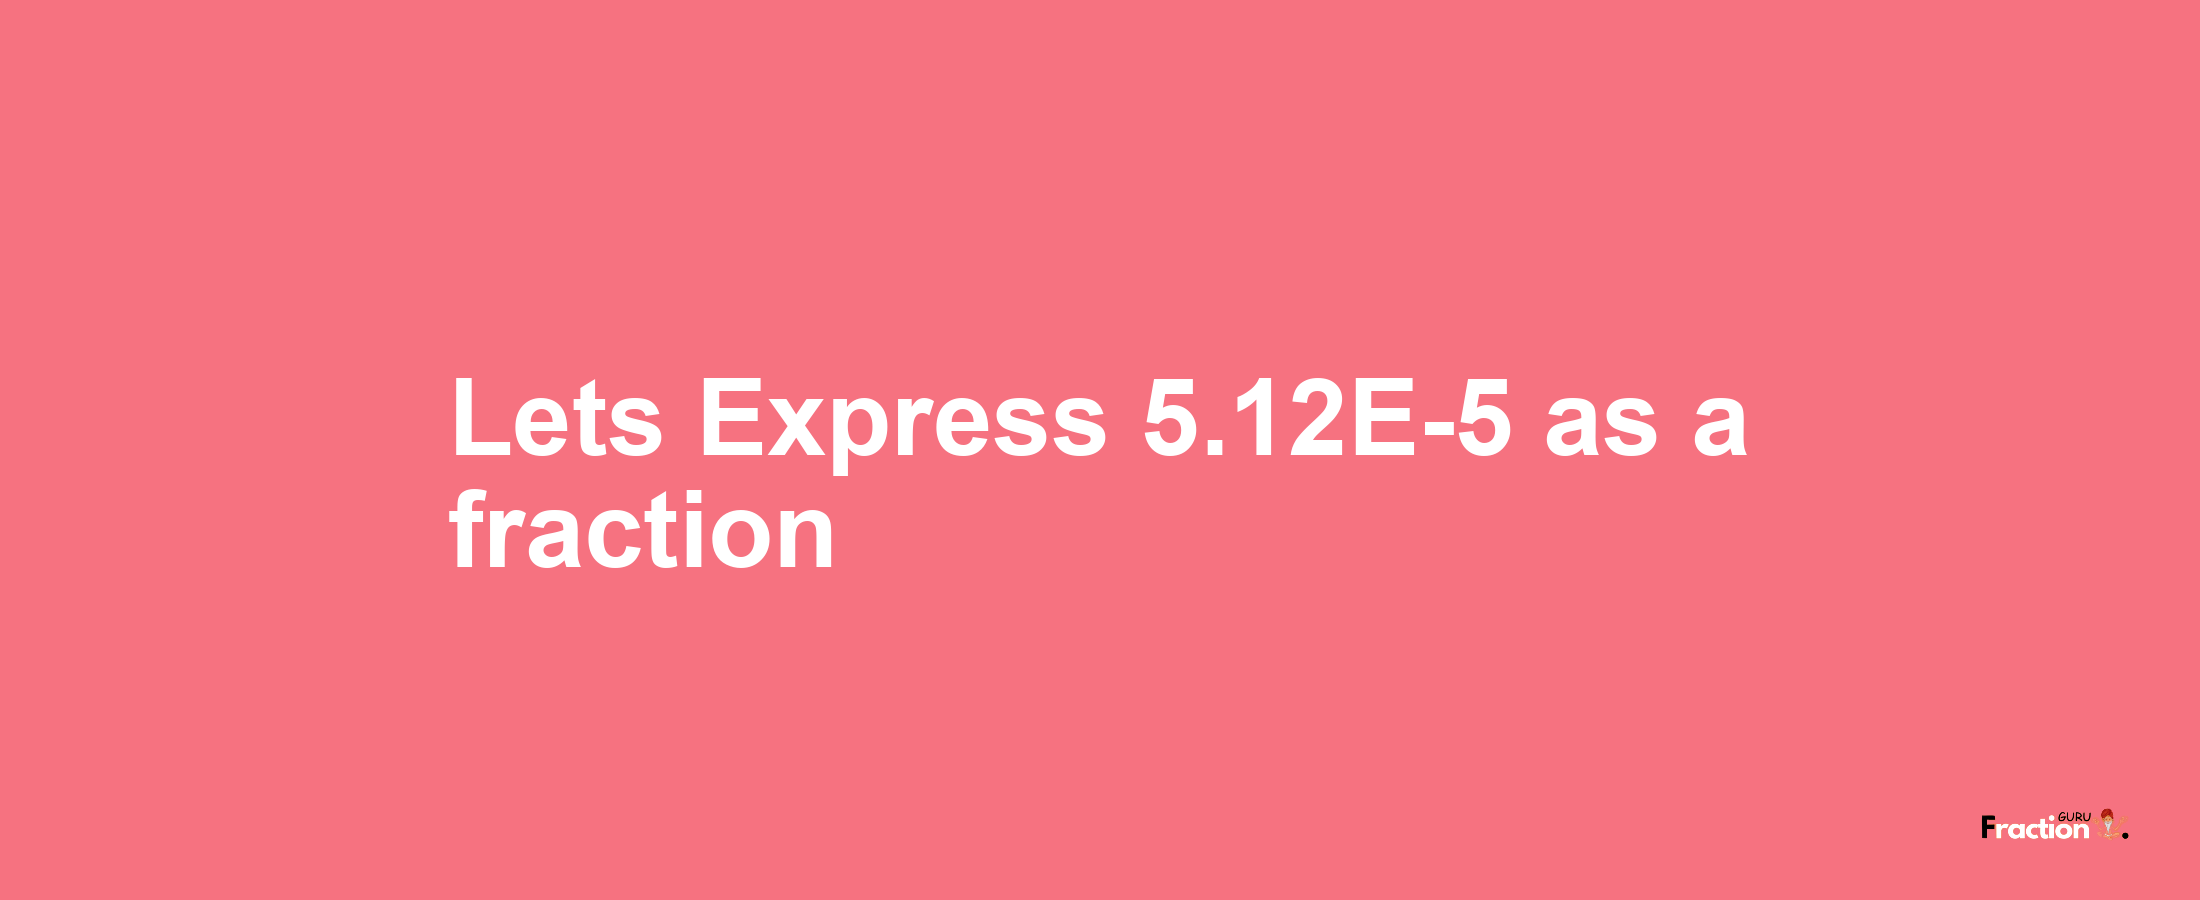 Lets Express 5.12E-5 as afraction